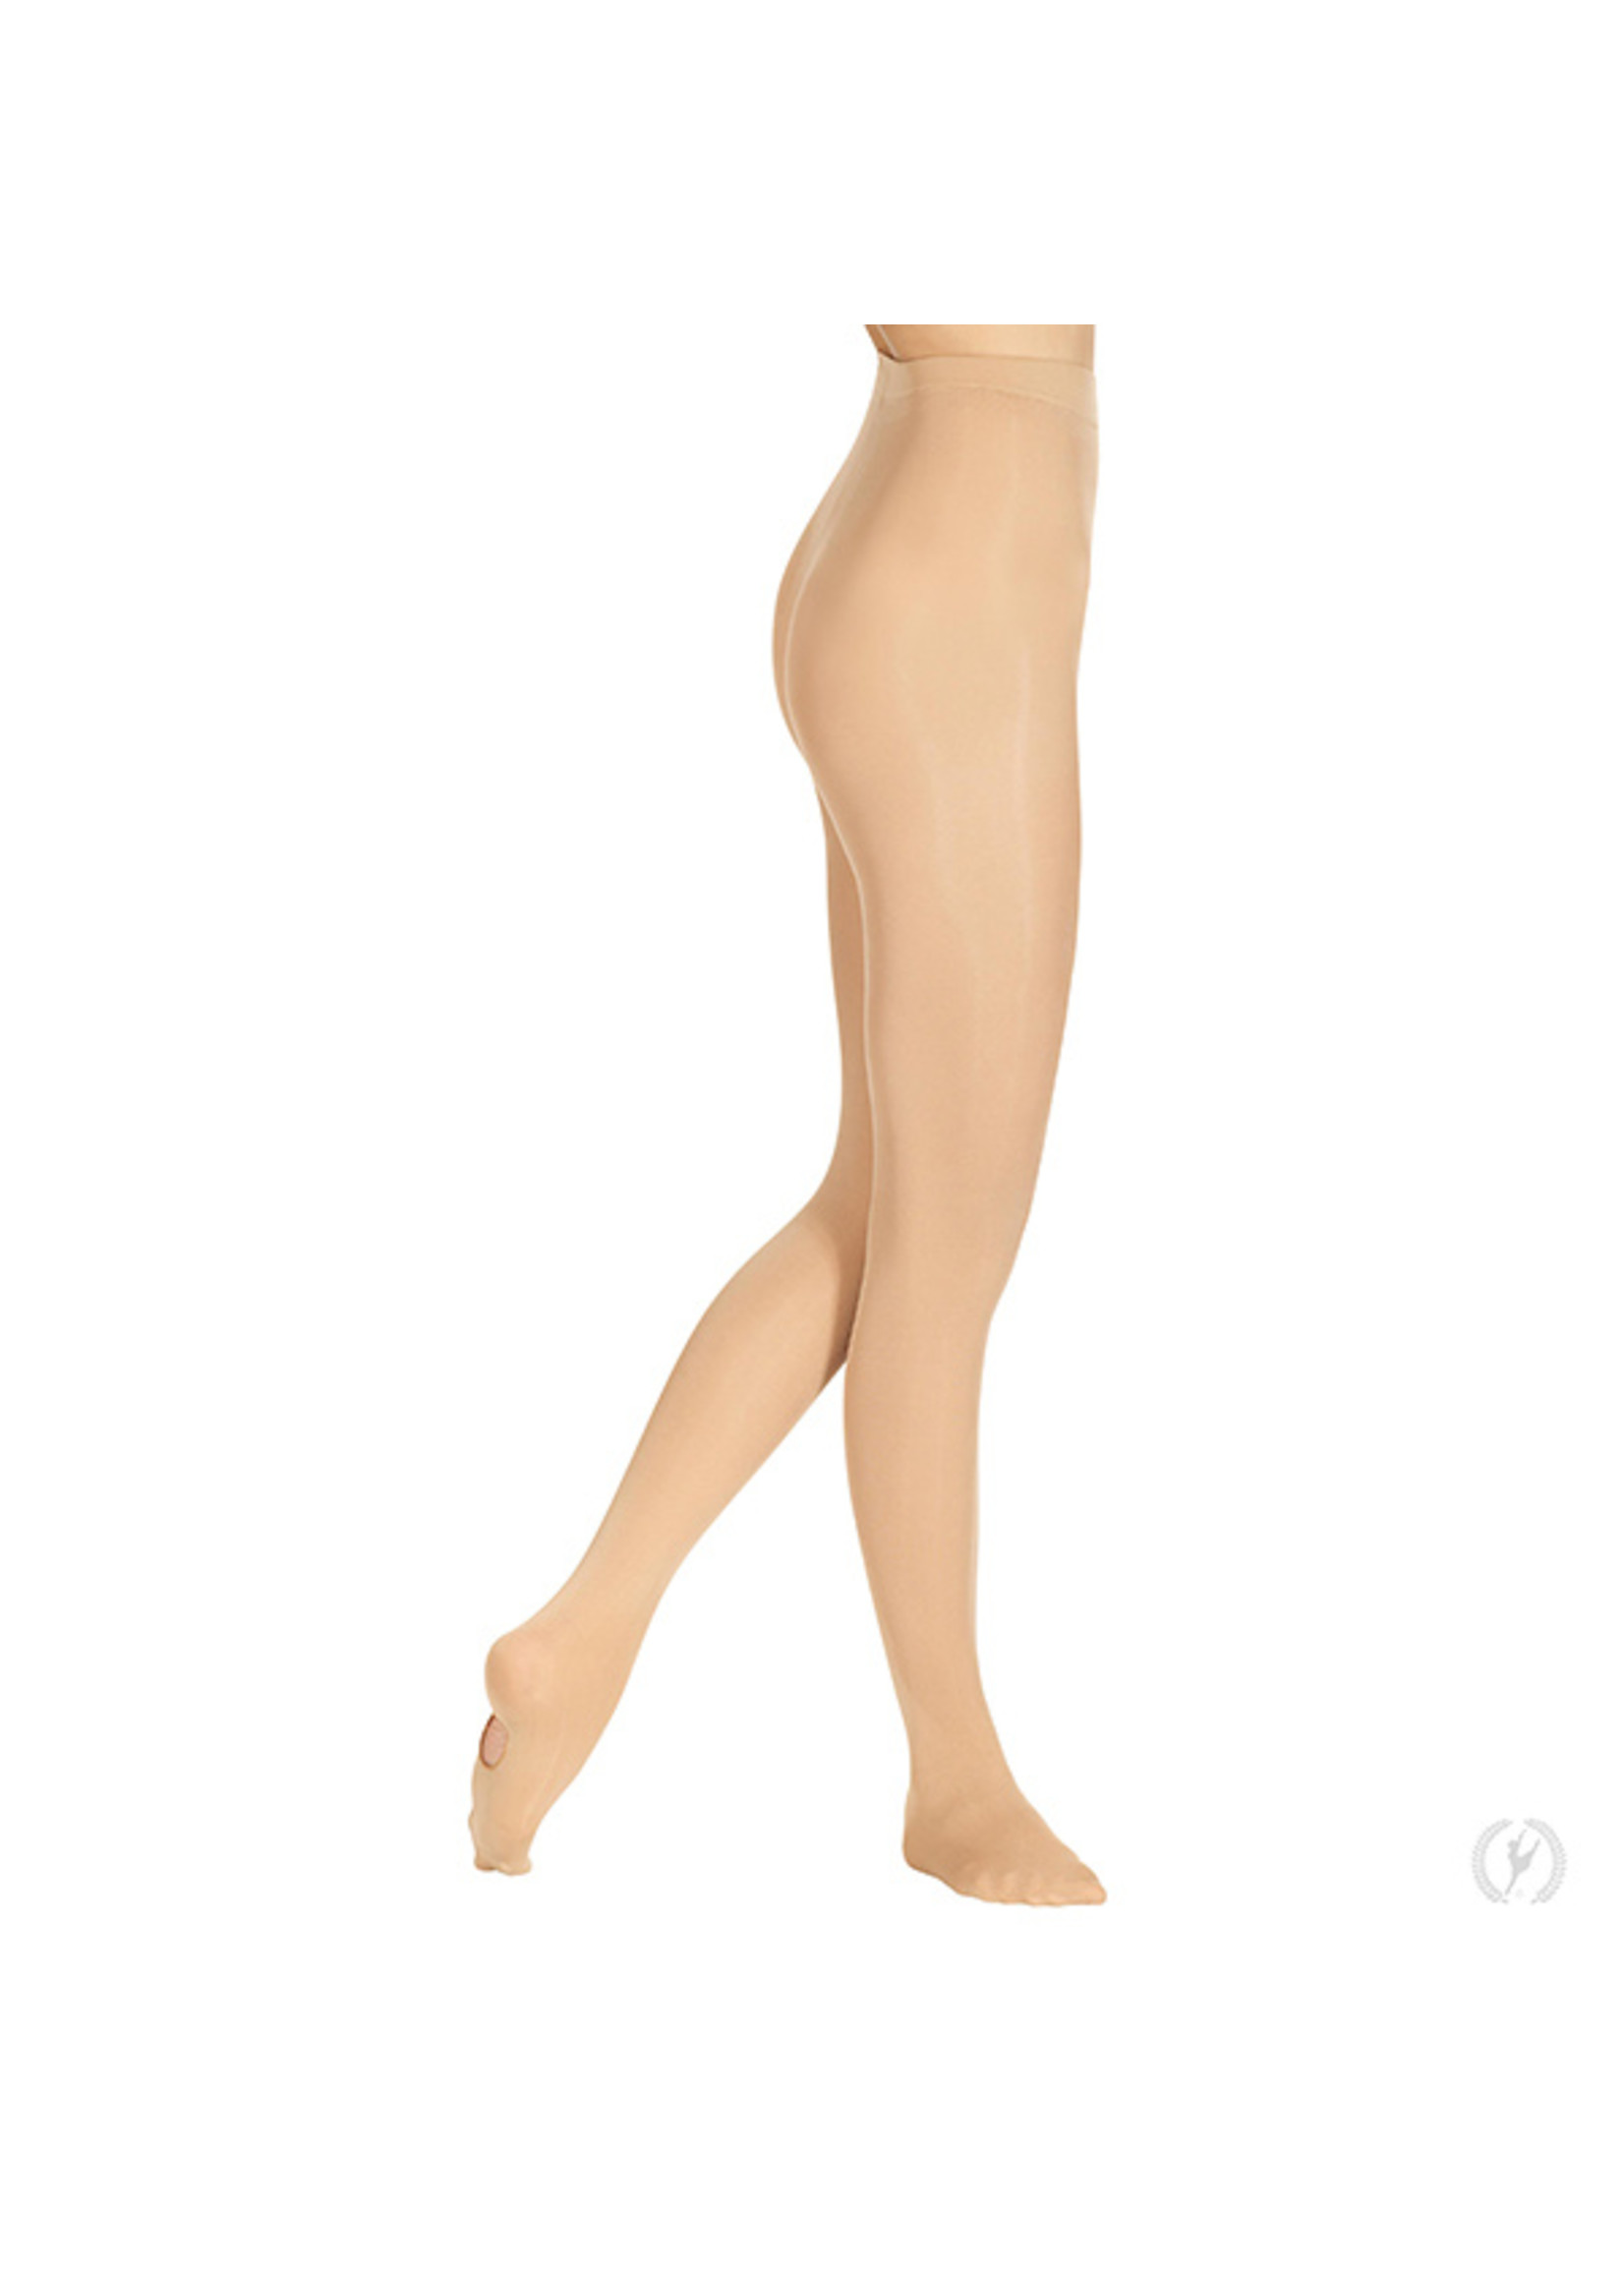 Non-Run Convertible Tights with Soft Knit Waistband